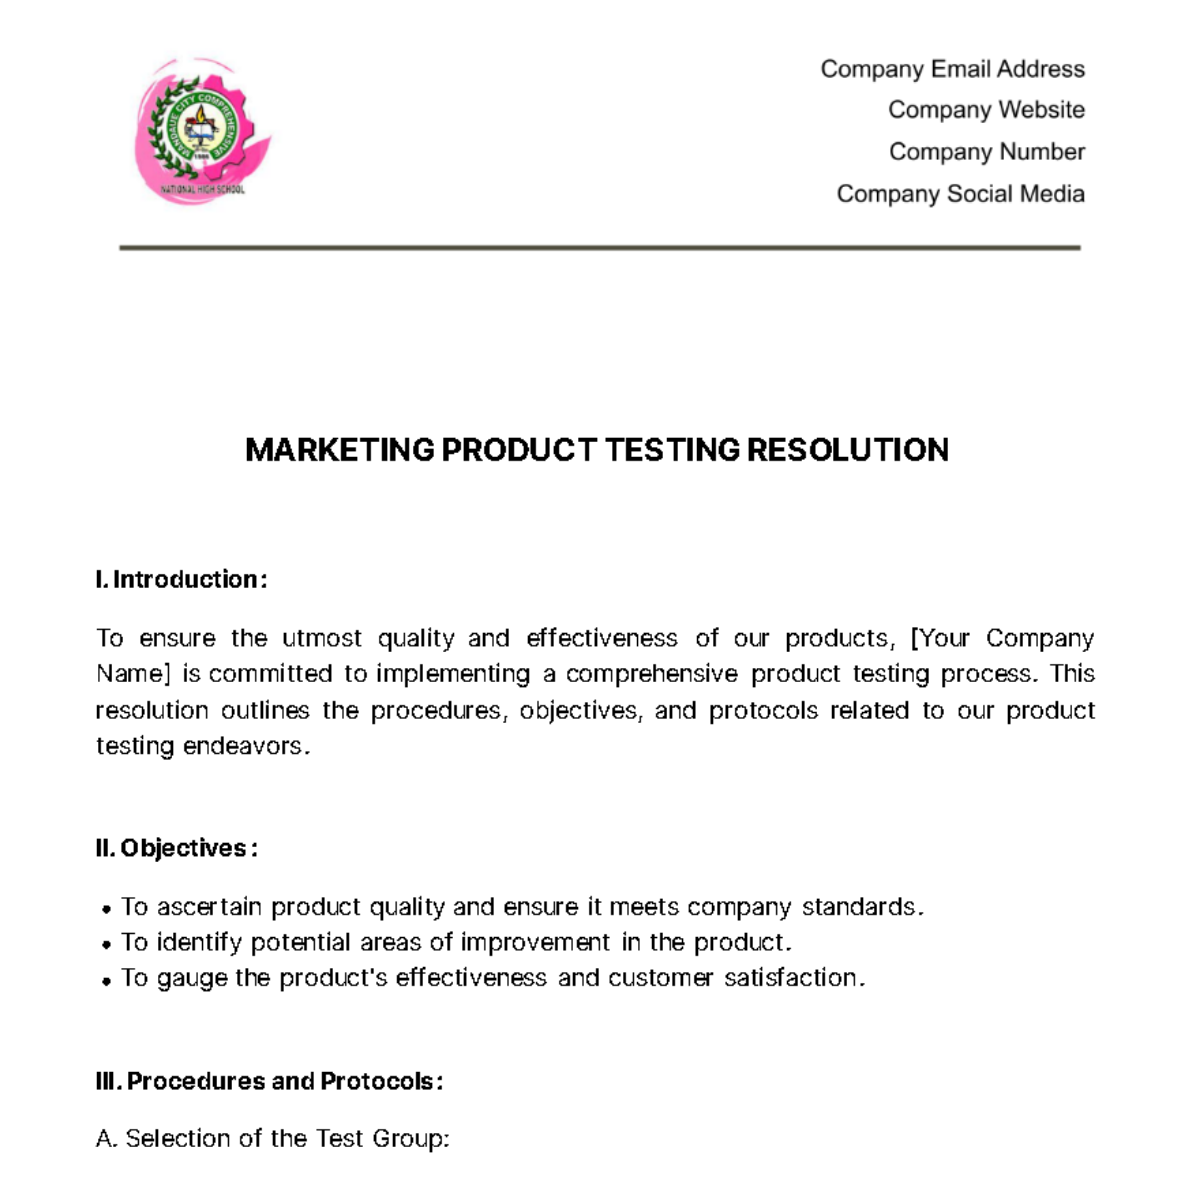 Marketing Product Testing Resolution Template